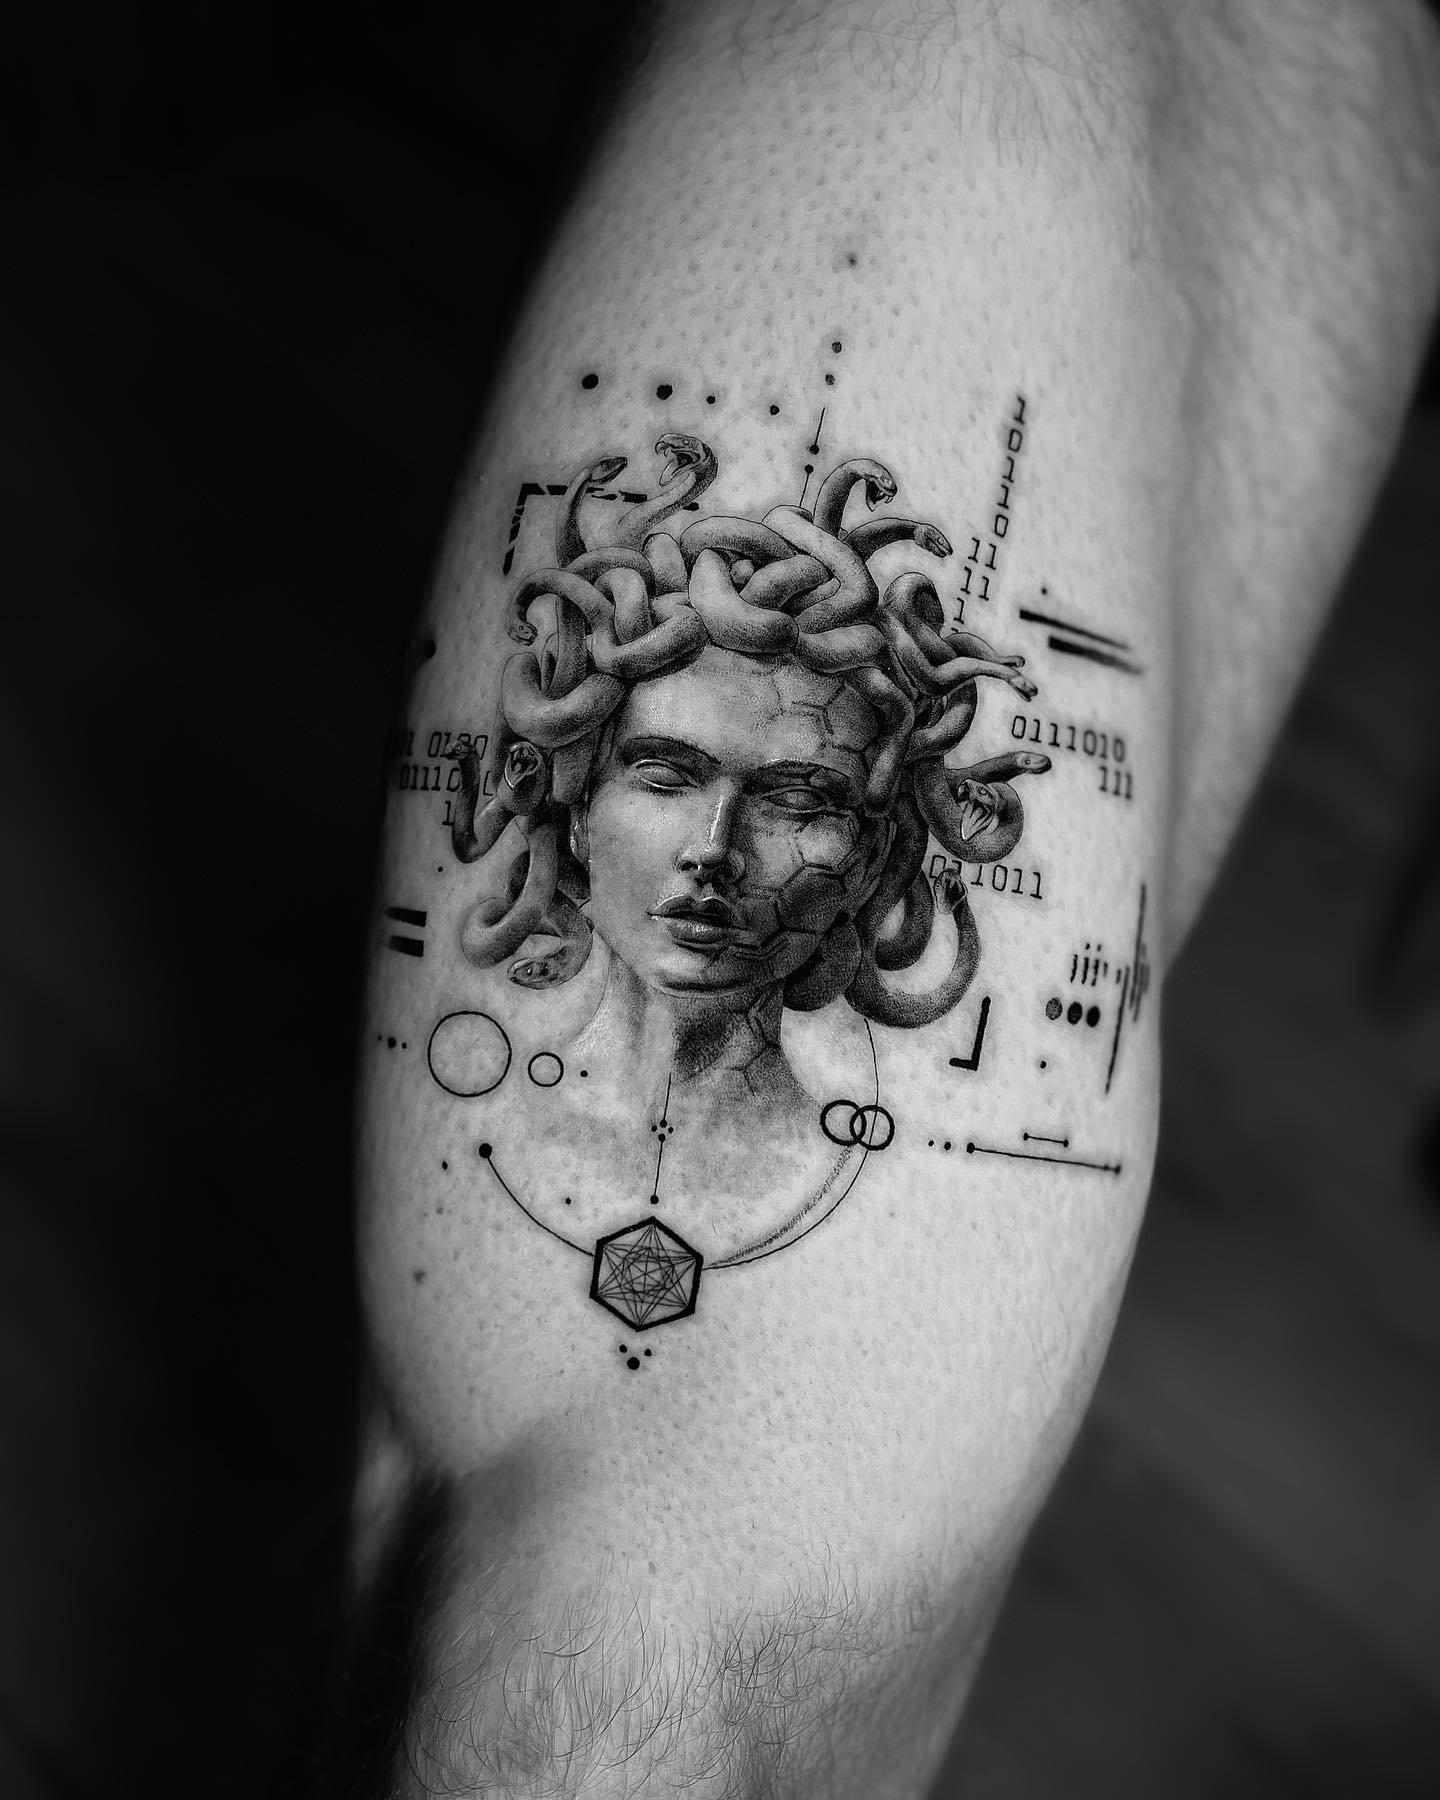 The tattoo above gives a statue feeling, doesn't it? To show your inner strength with a unique Medusa tattoo, this is for you. The hexagons covering the half of Medusa's face, circles and lines look quite mesmerizing. Don't forget that you need to find a talented tattooist to get it.